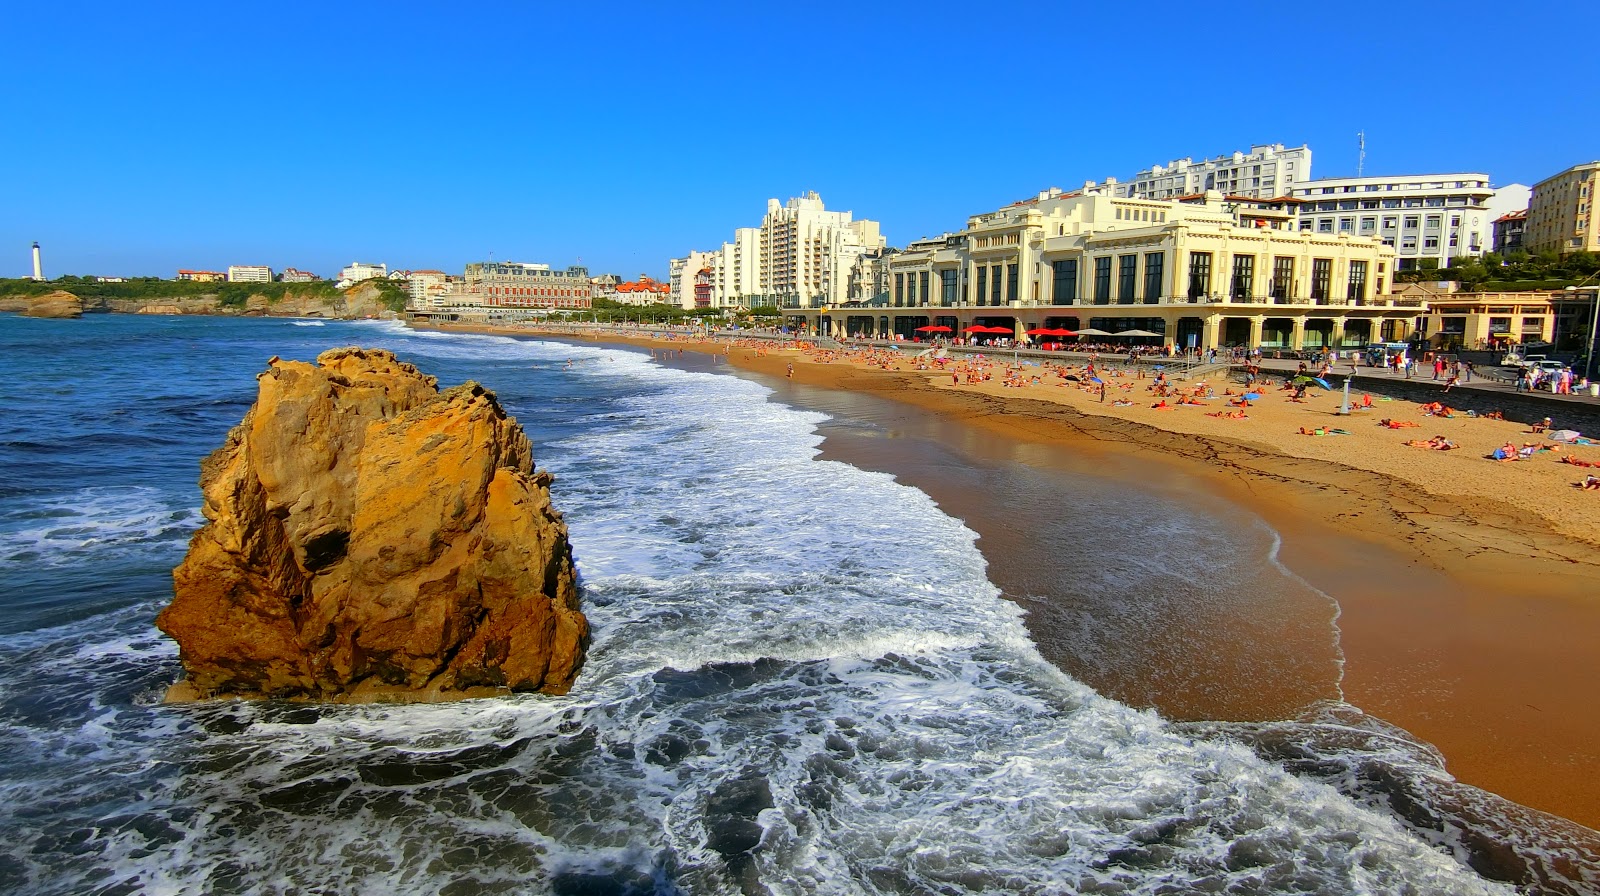 Photo of Plage de Biarritz with bright sand surface